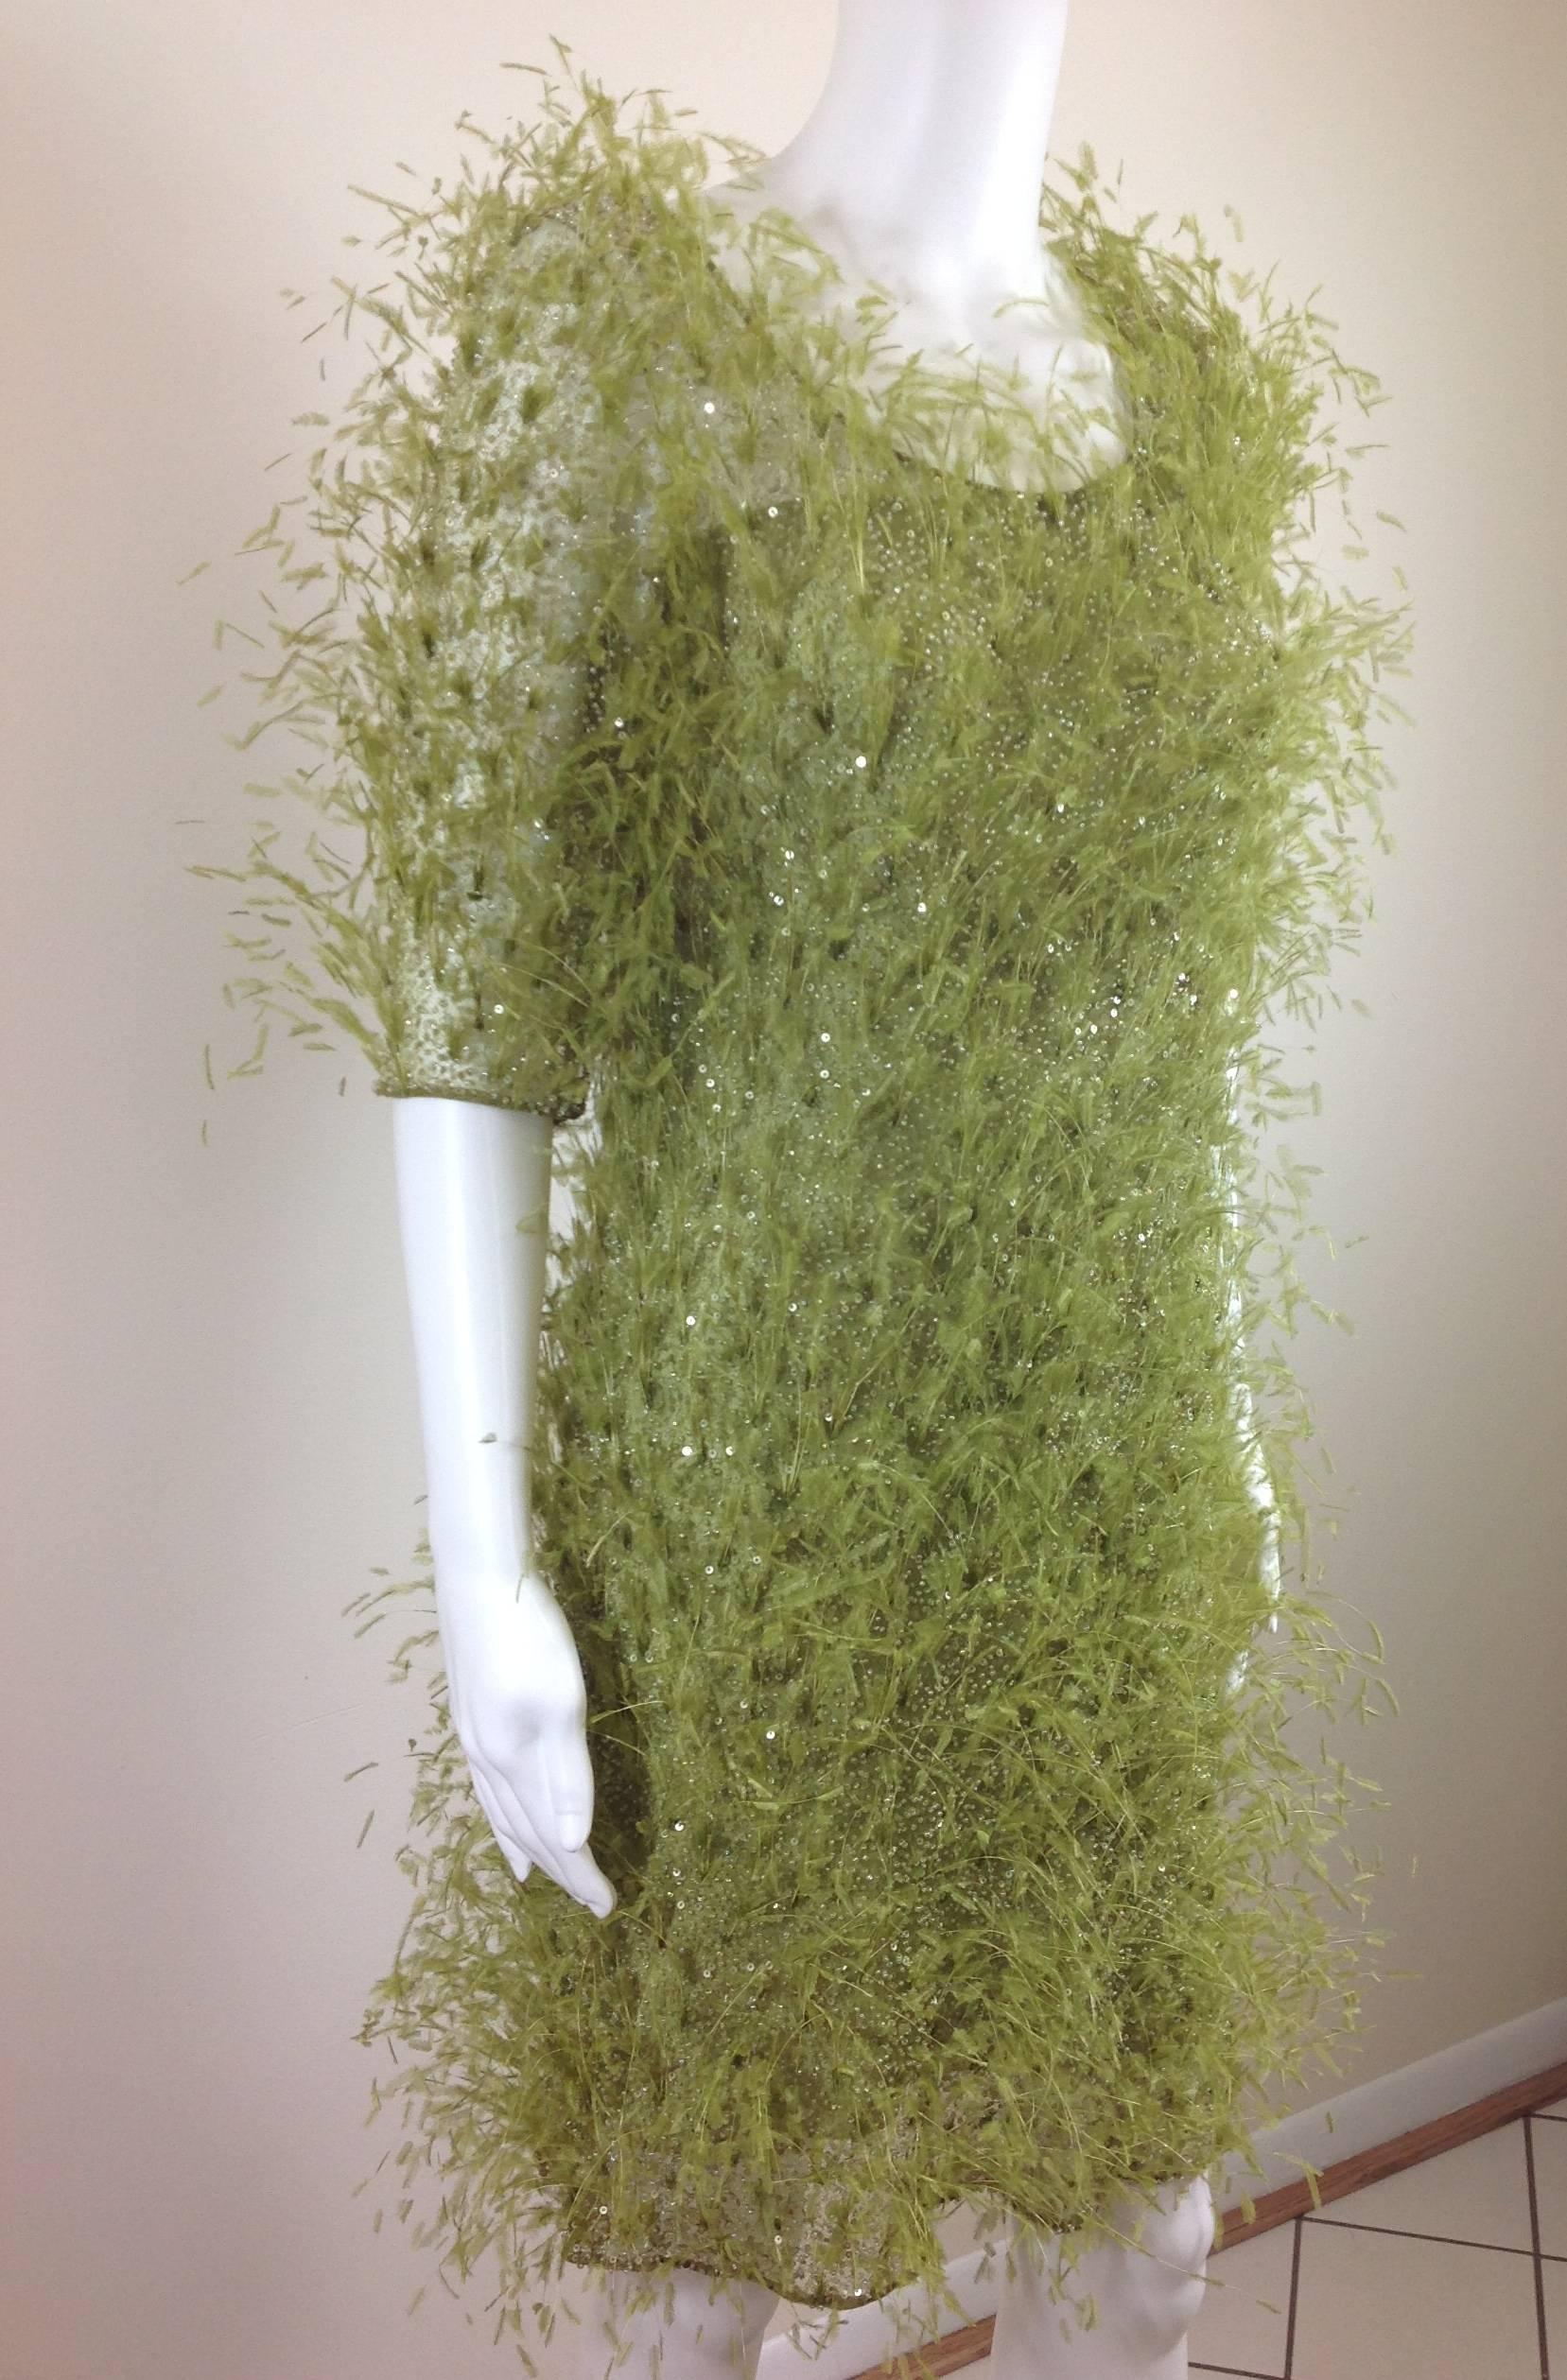 Chado Ralph Rucci 2 piece lime green party dress.  
Sheath style with lime green feathers, iridescent mini beads, lime green mini sequins sewn on stretch mesh-a true work of art.  
13.25